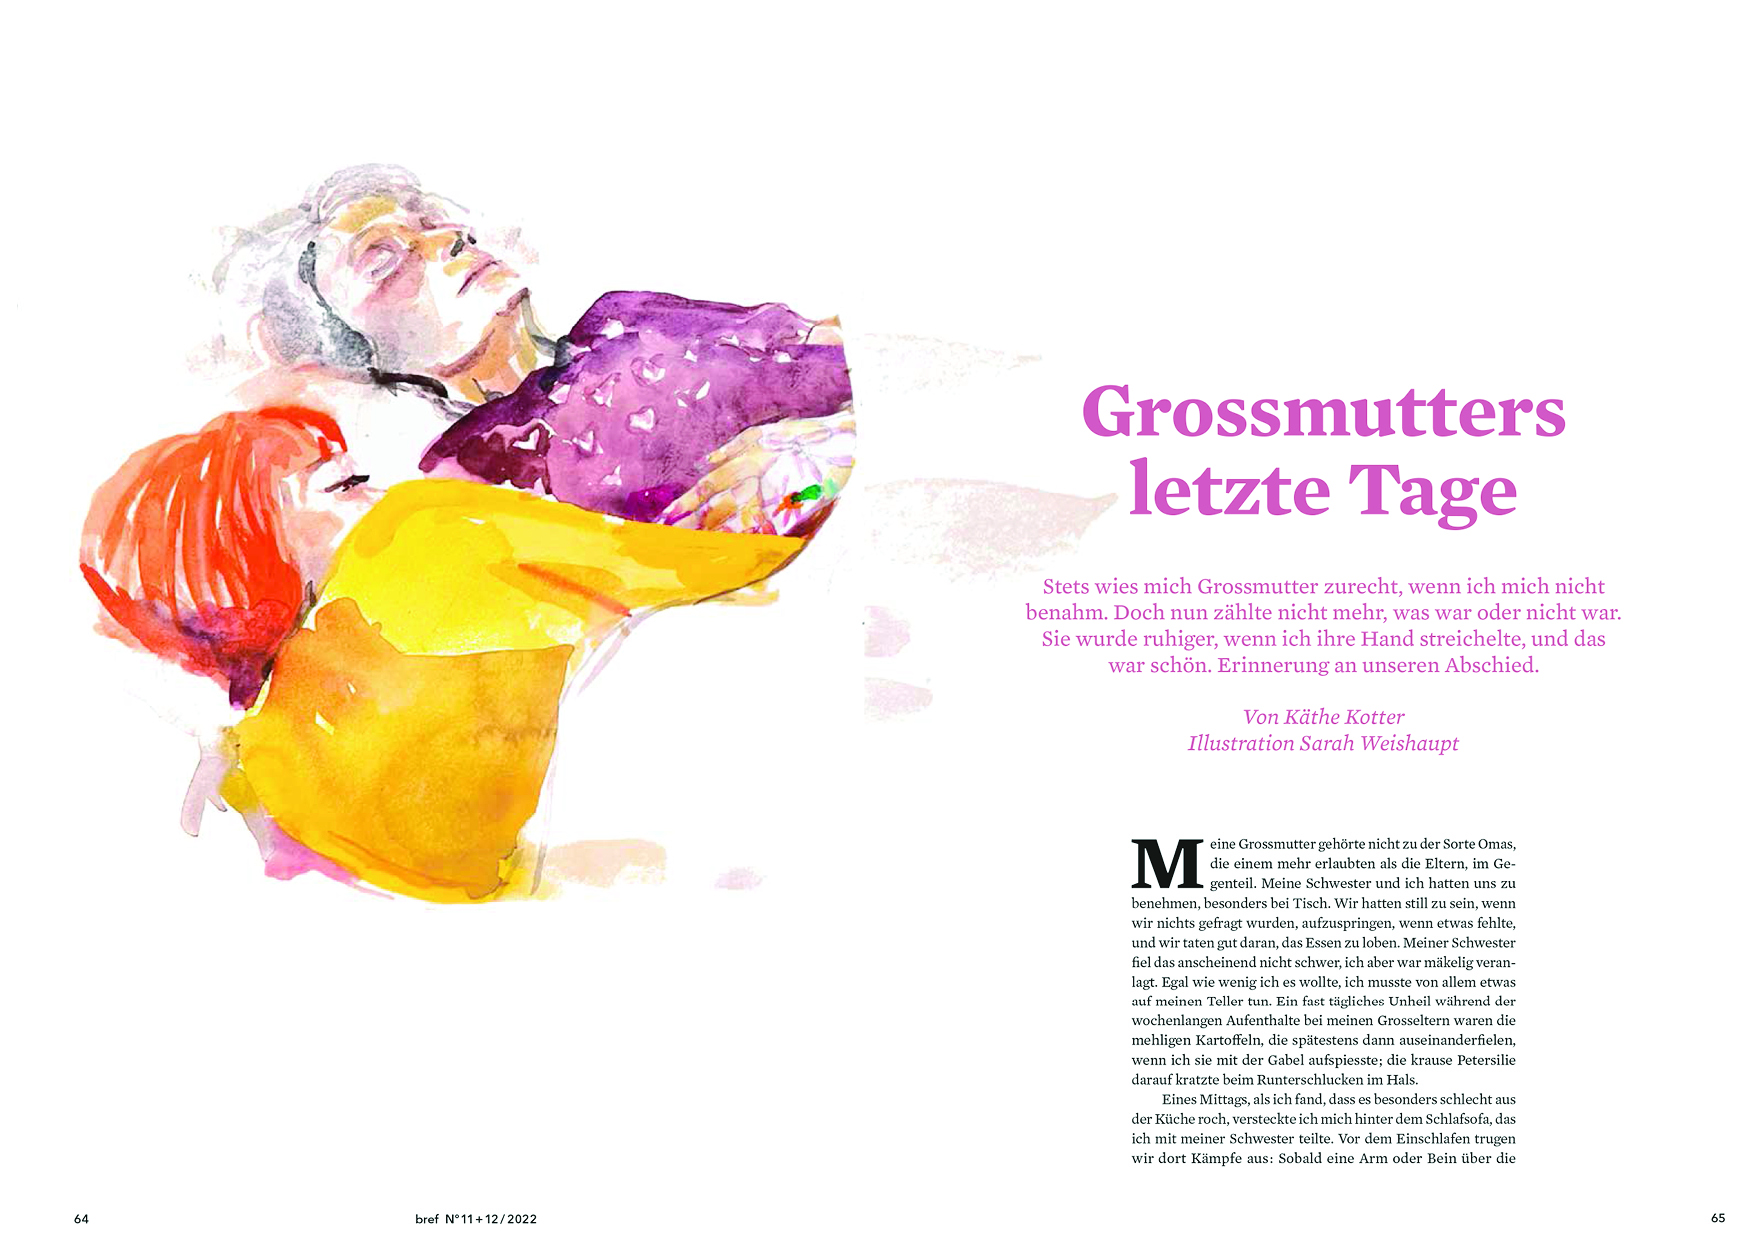 https://www.sarahweishaupt.ch/media/pages/home/illustration-tod-der-grossmuttermagazin-bref/e30f6bed98-1671550907/09e9f103-a064-4e34-bb1a-88539db02c0c.jpeg